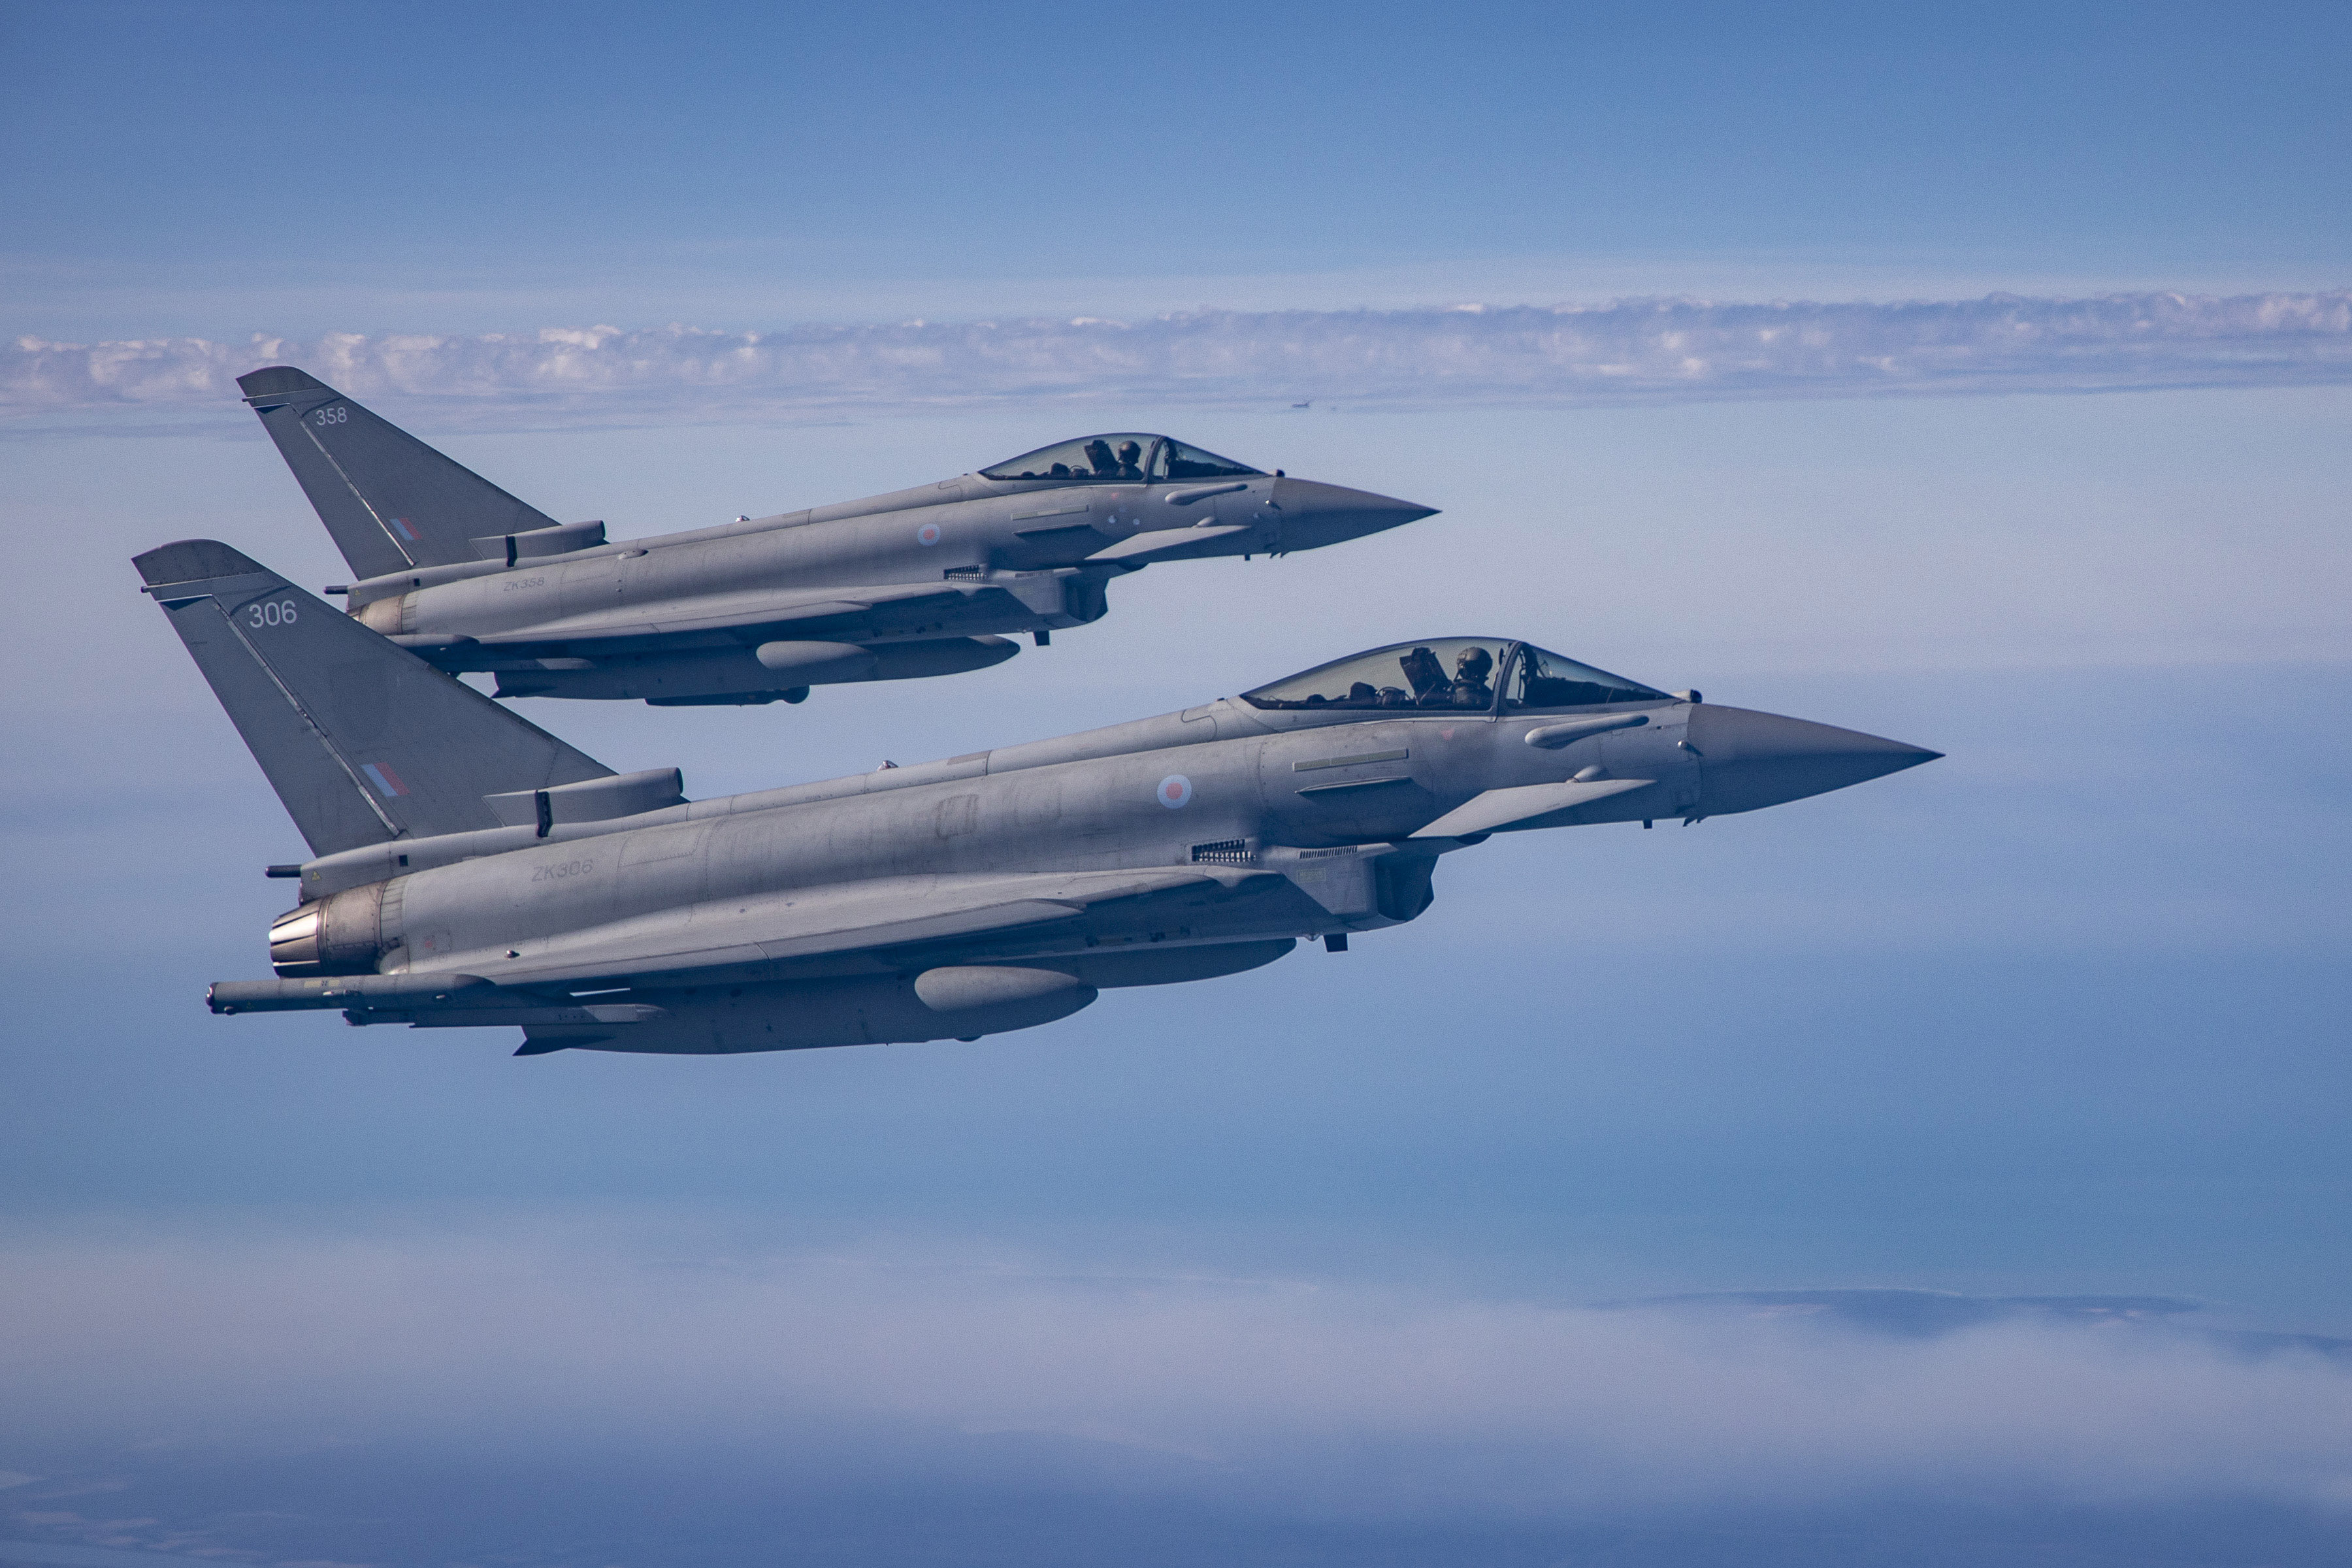 2 typhoon aircraft in the sky